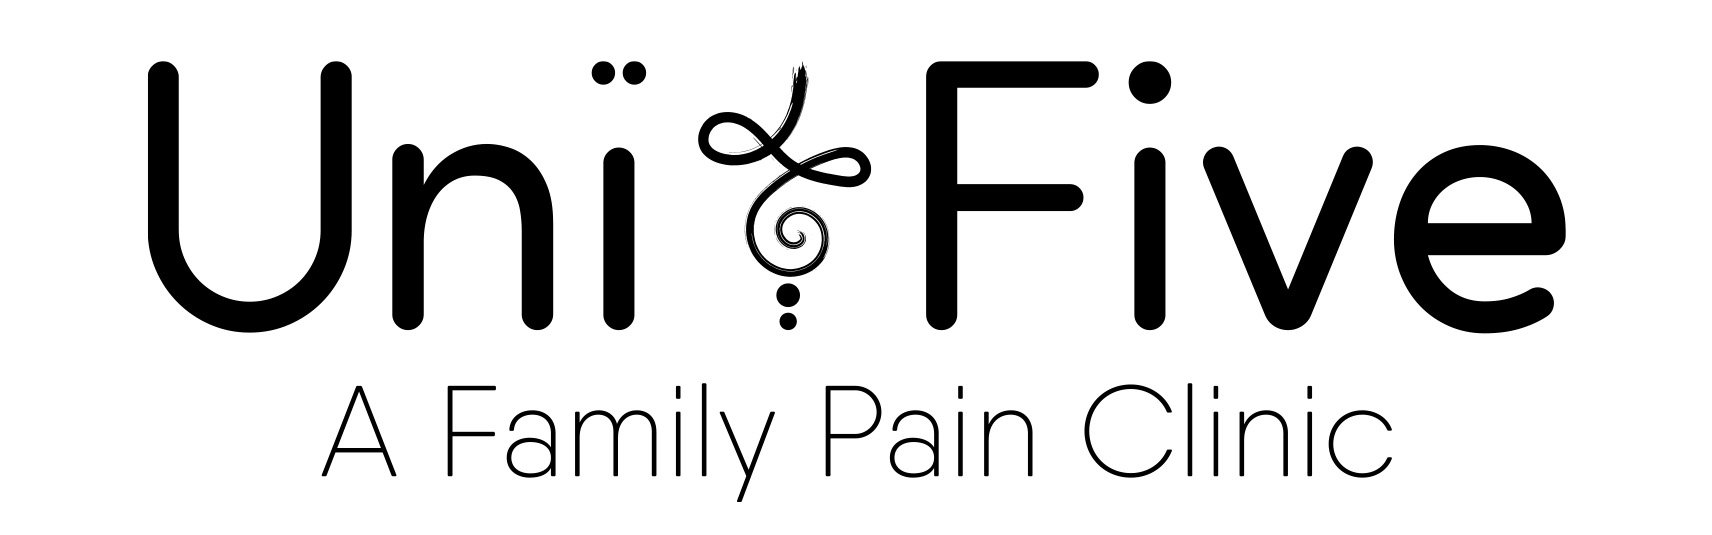 Gibvey Pain Clinic (becoming Uni Five Family Pain Clinic)